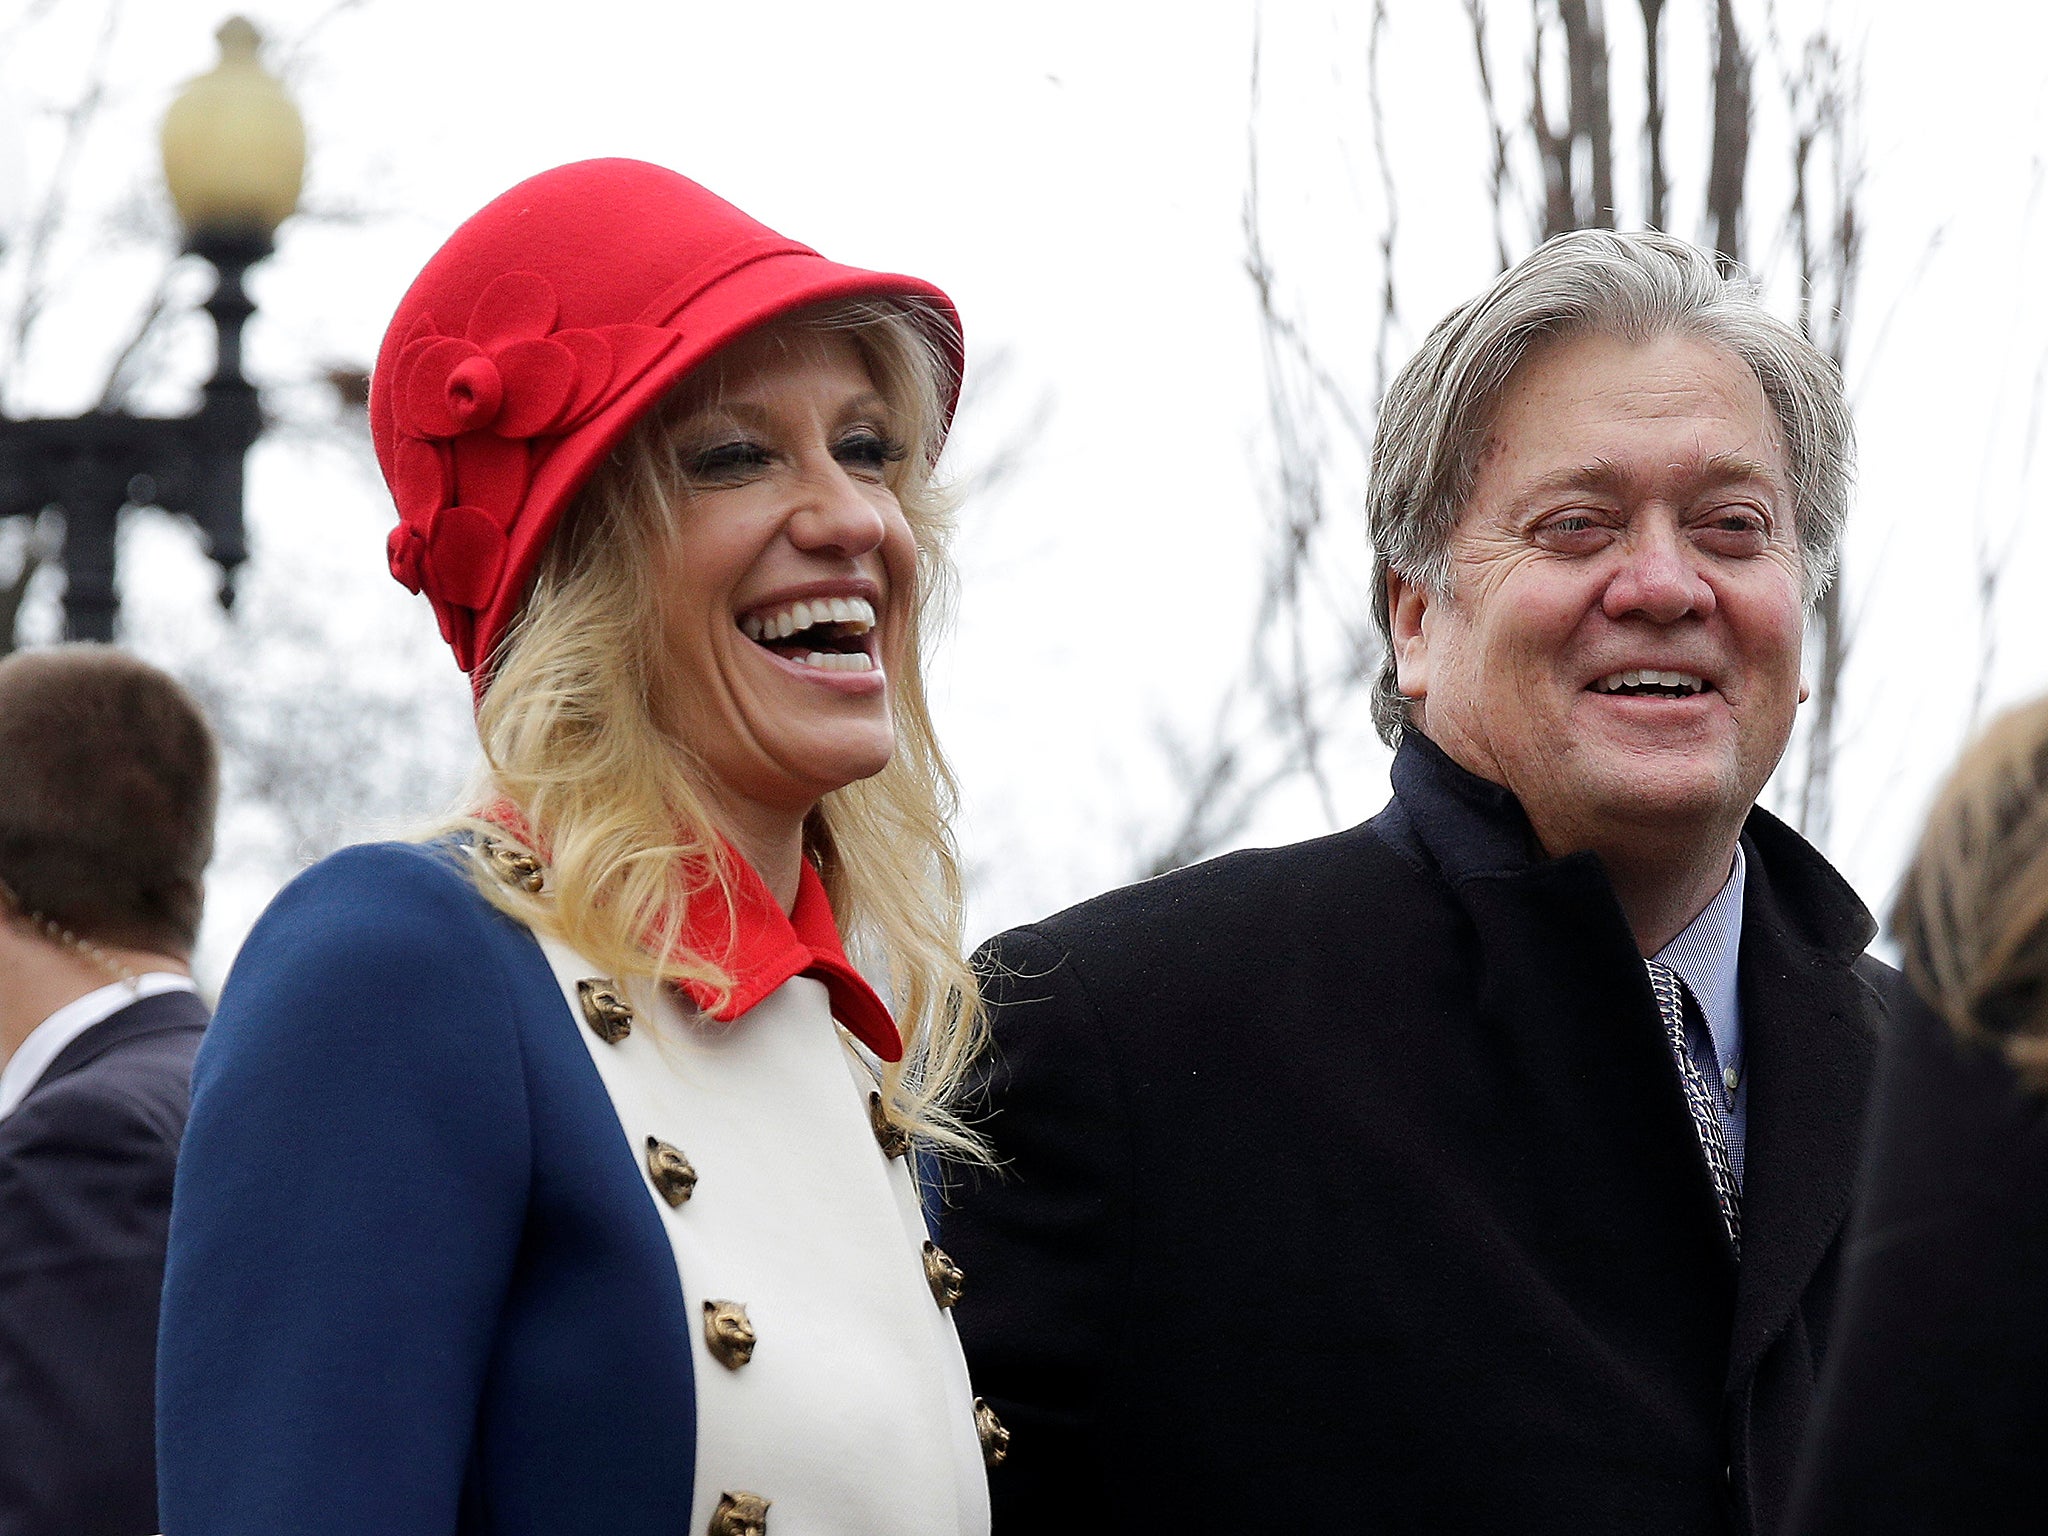 Kellyanne Conway (L) and Steve Bannon (R) are both said to have active private email accounts on an RNC system